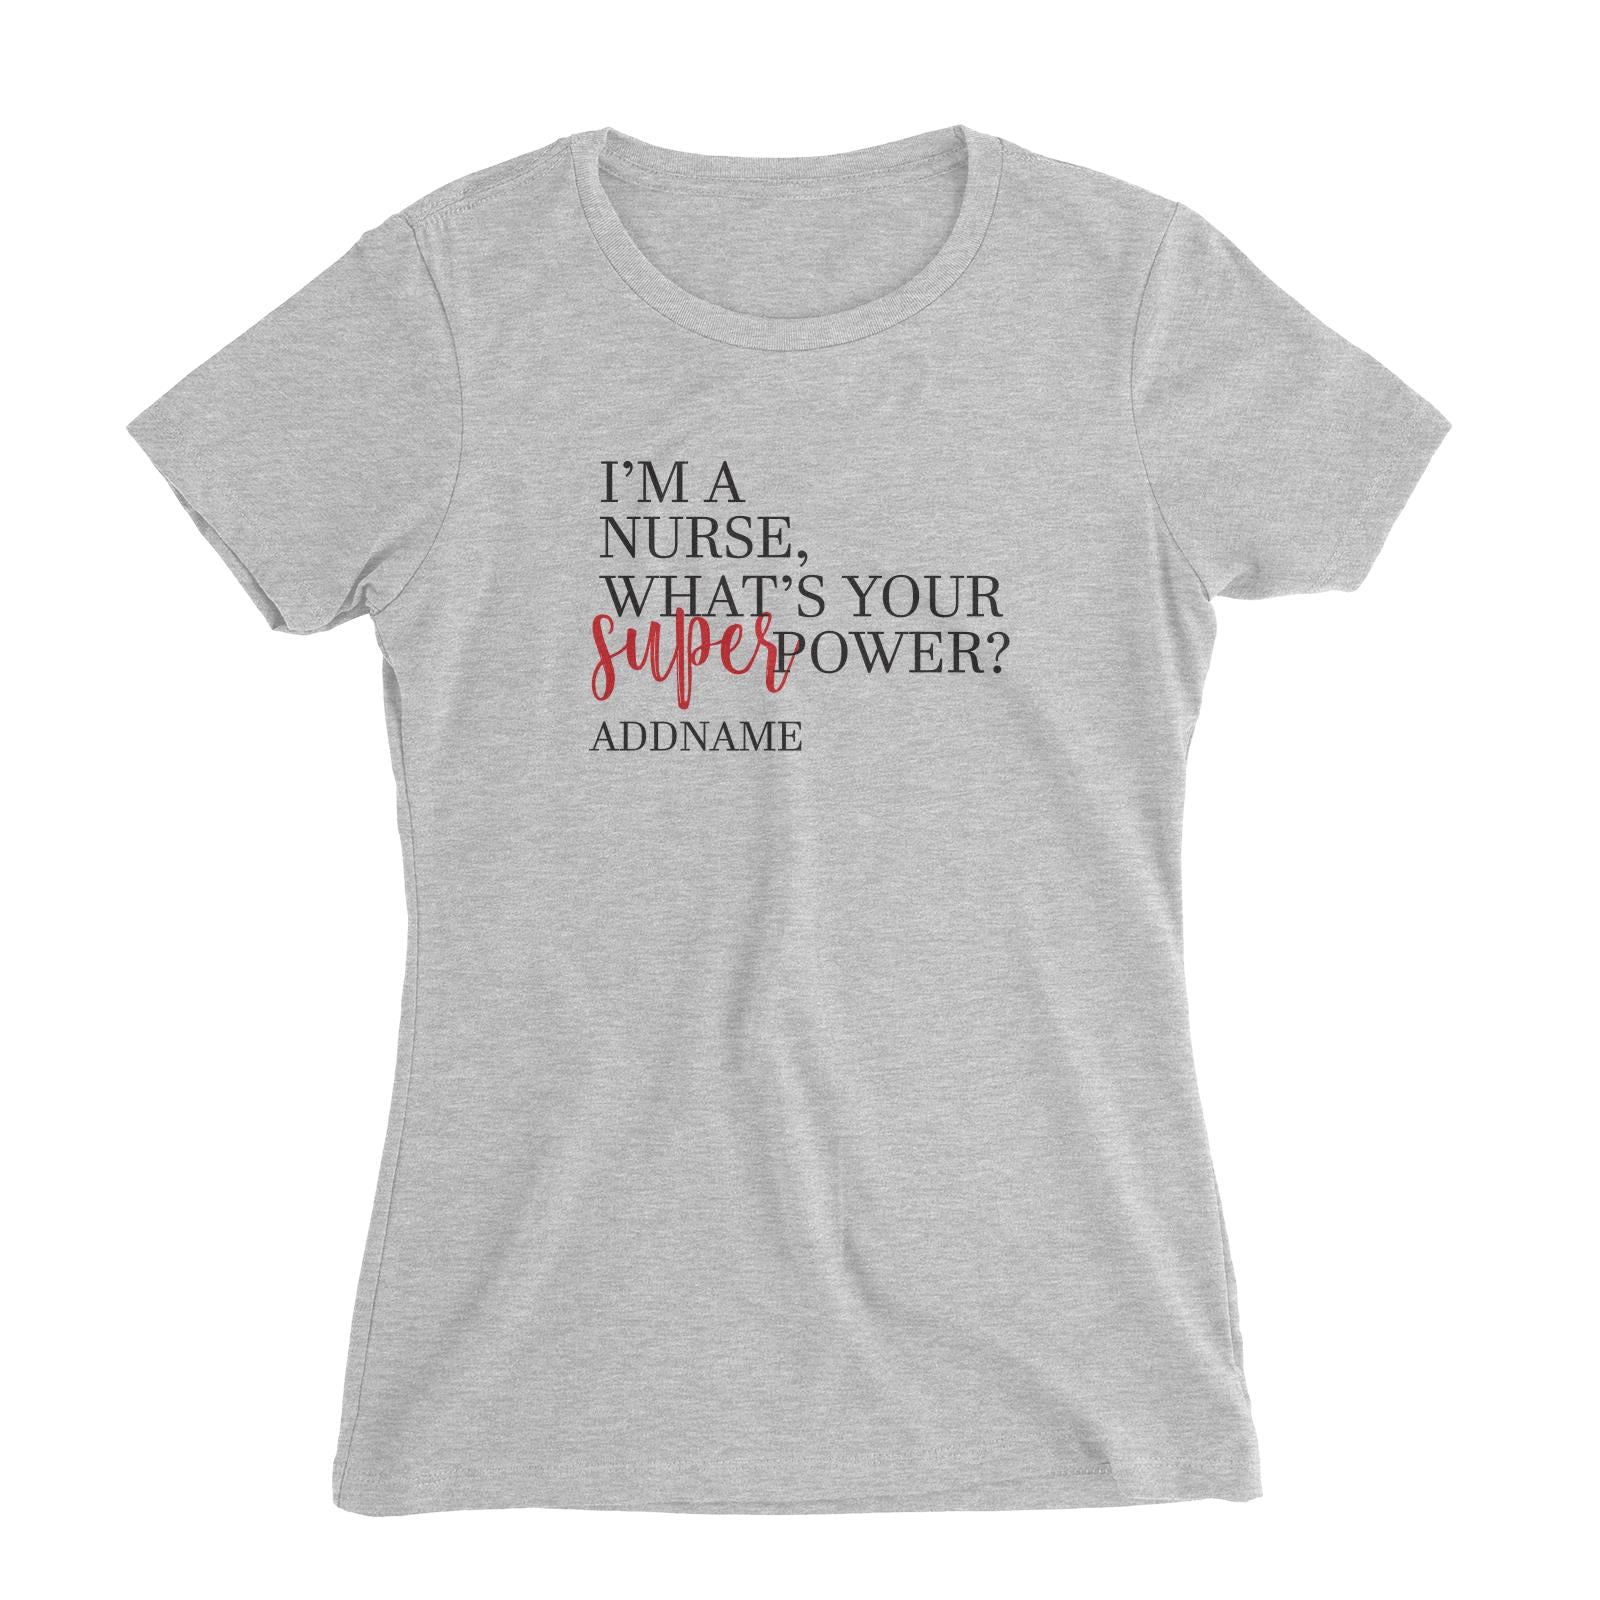 I'm A Nurse, What's Your Superpower Women's Slim Fit T-Shirt